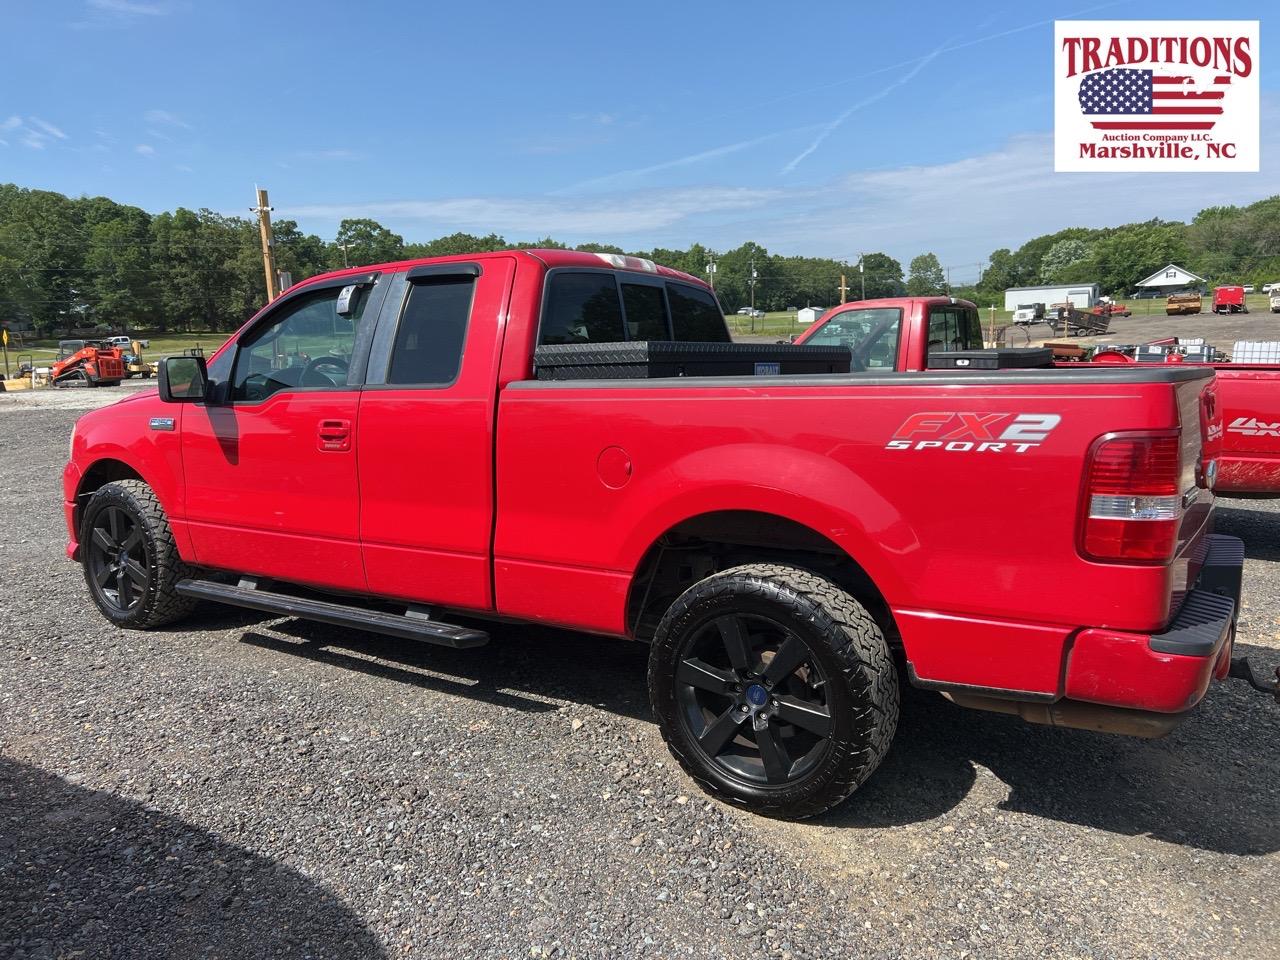 2007 Ford F150 VIN 0674